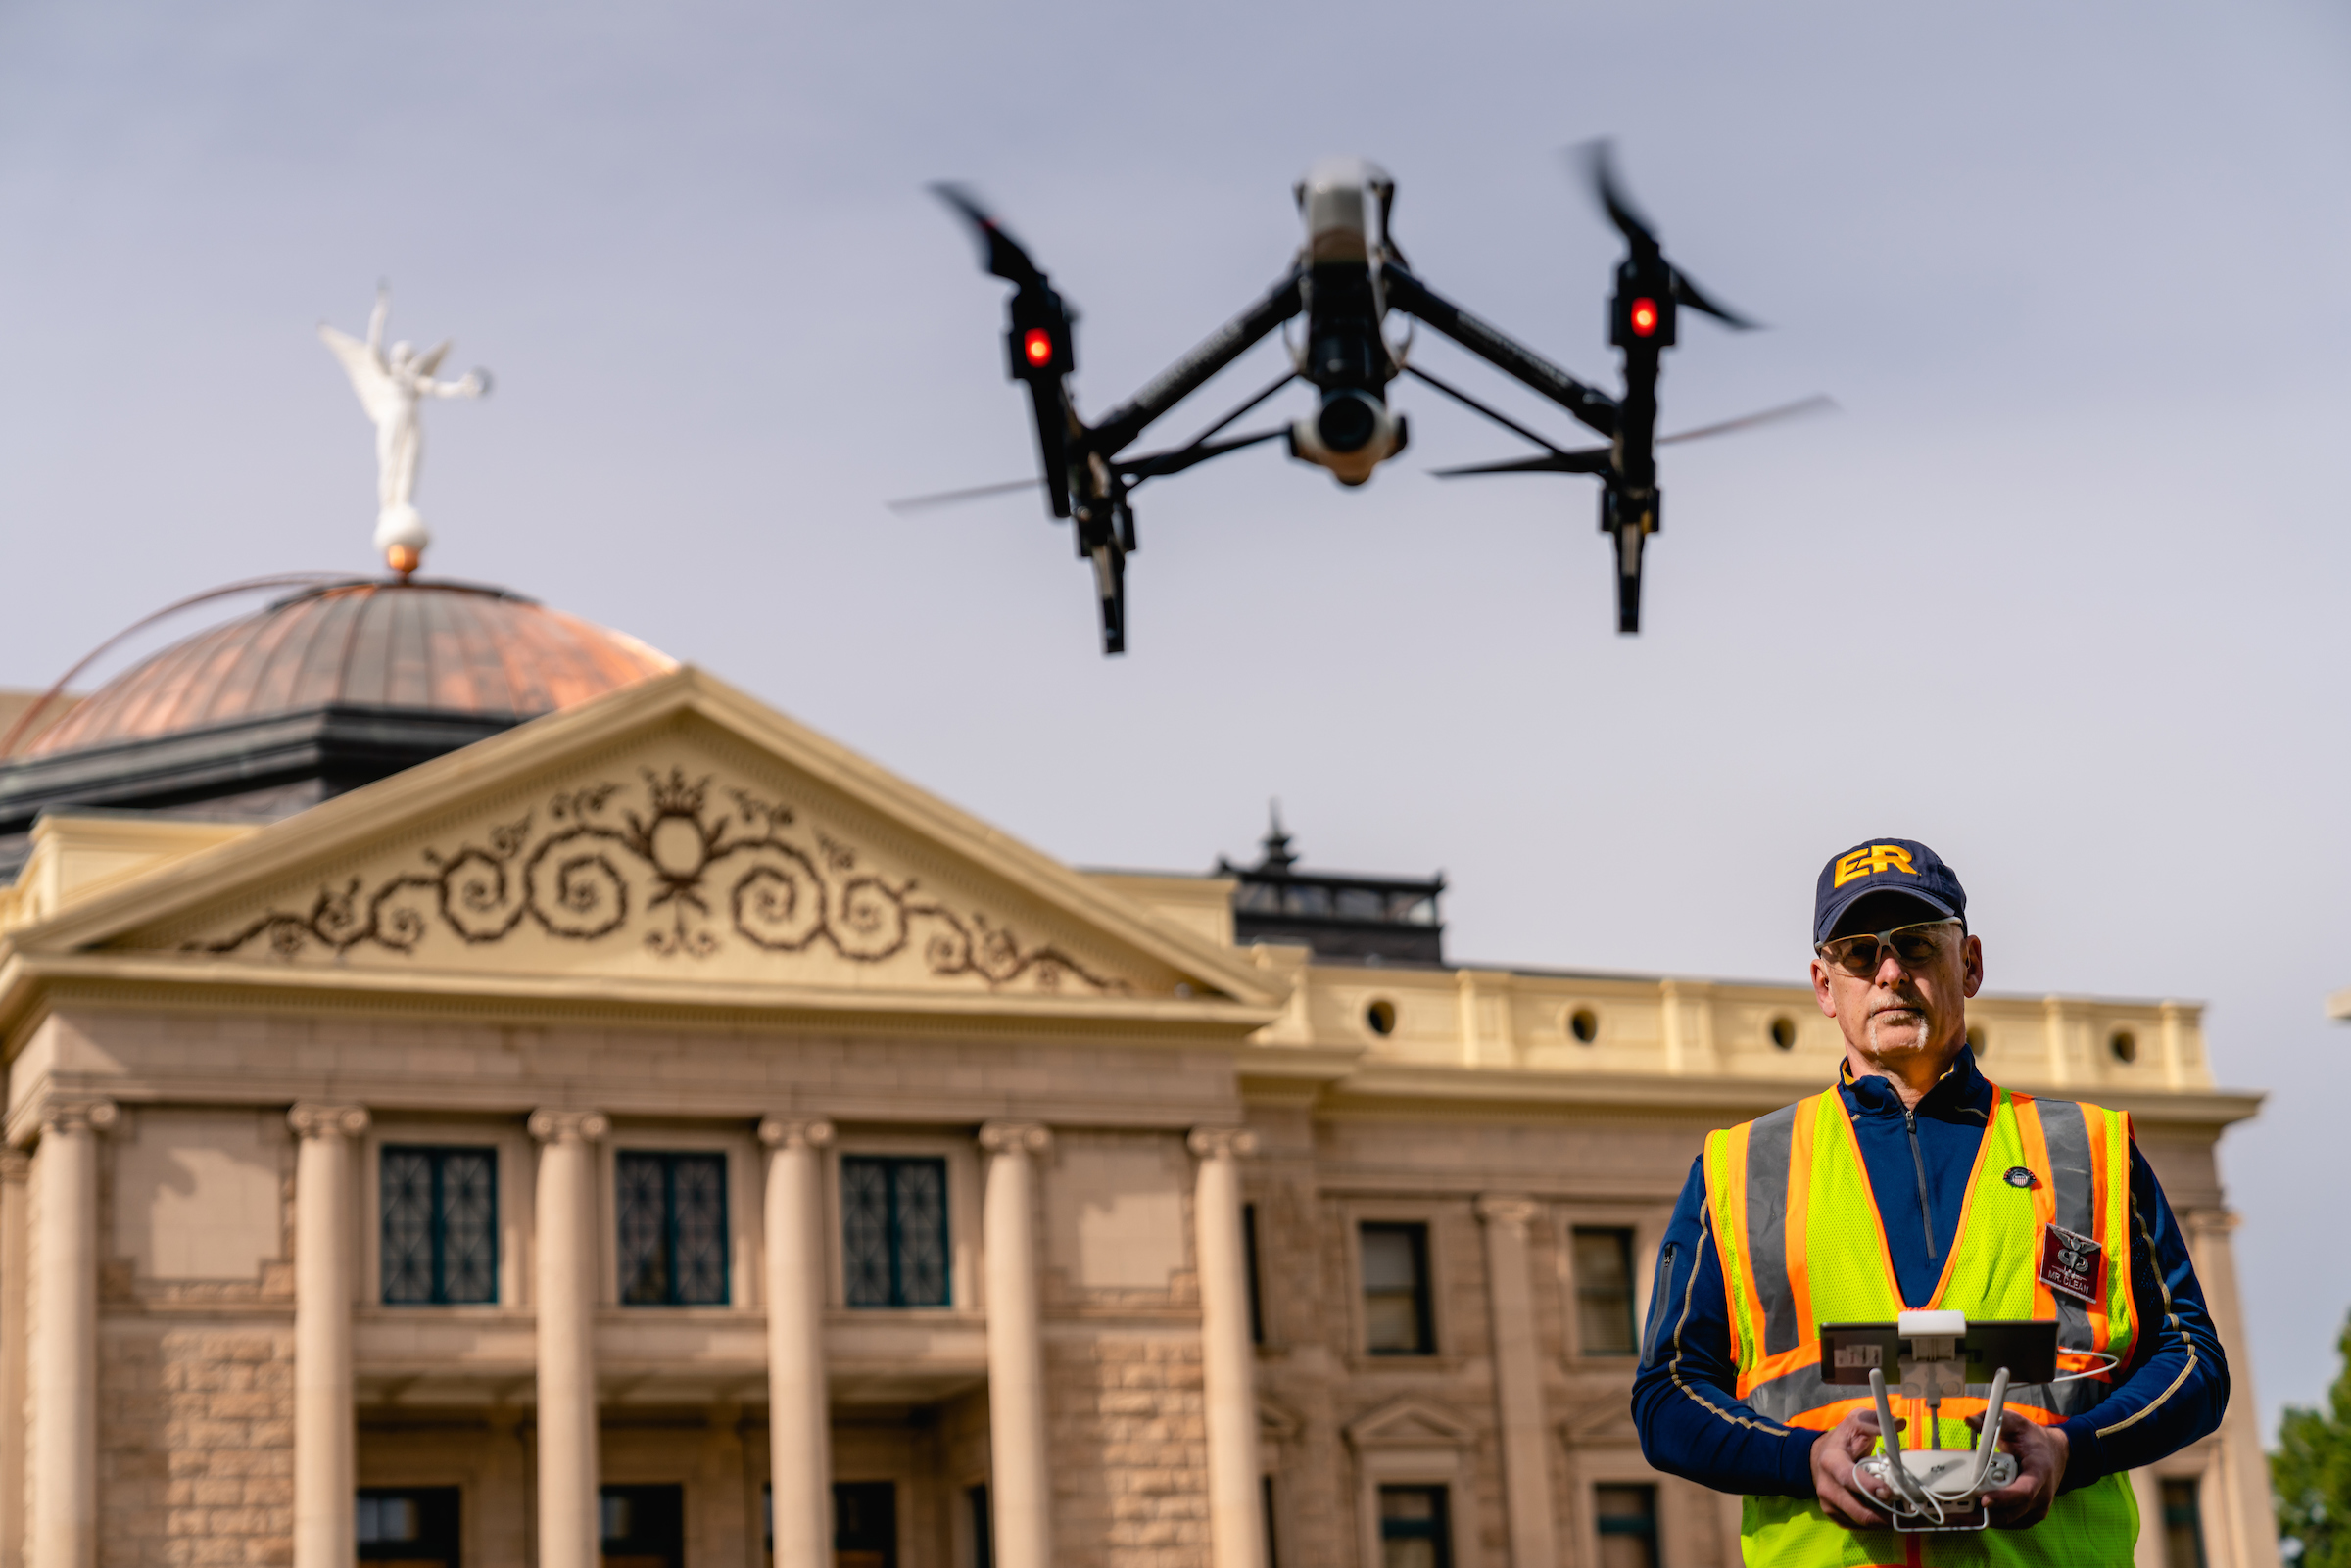 Operator flying sUAS in front of historic-looking building